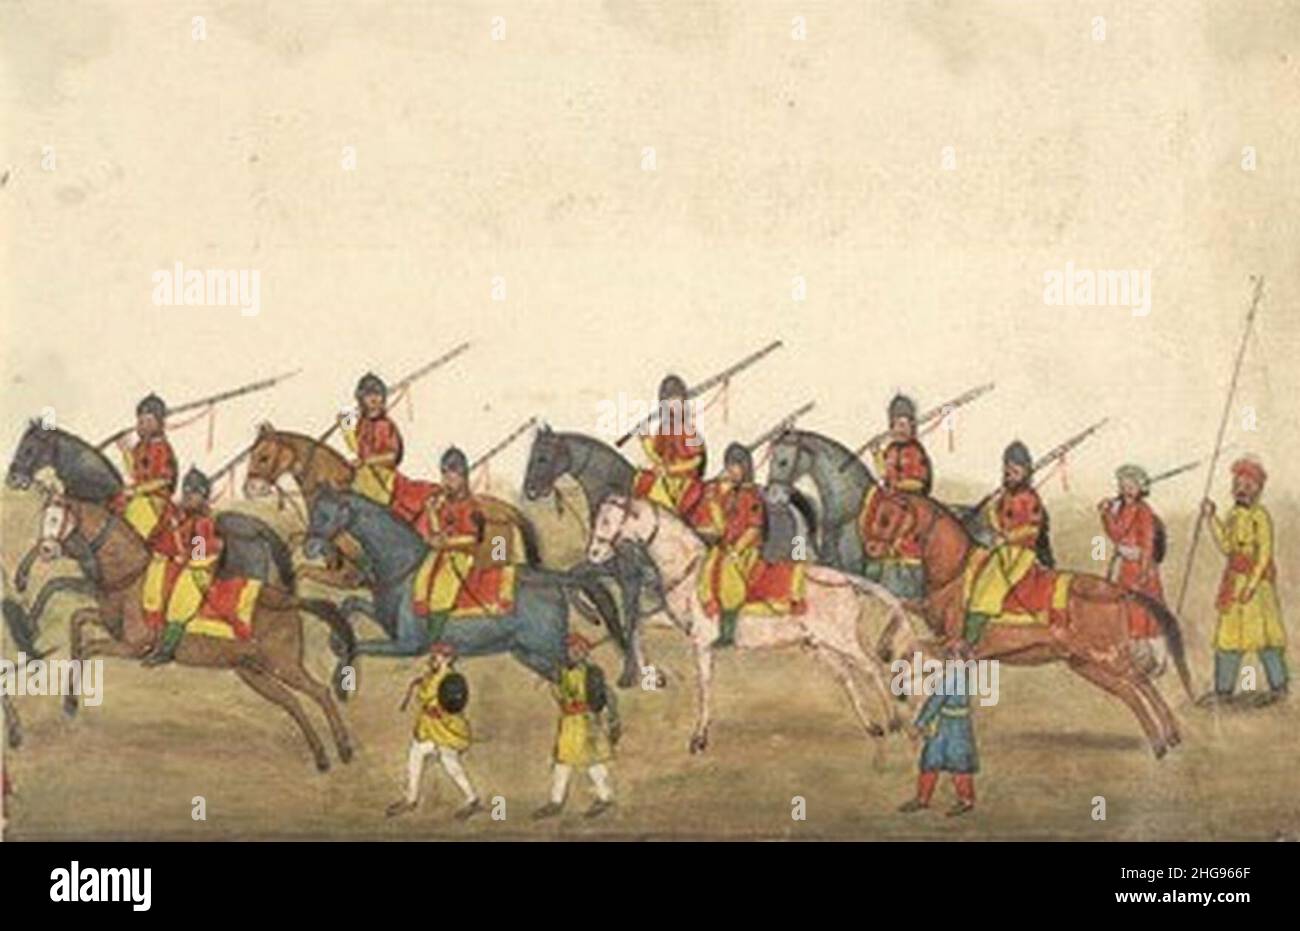 Skinner's Horse party, in a folio from 'Reminiscences of Imperial Delhi’, an album by Thomas Metcalfe, 1843. Stock Photo